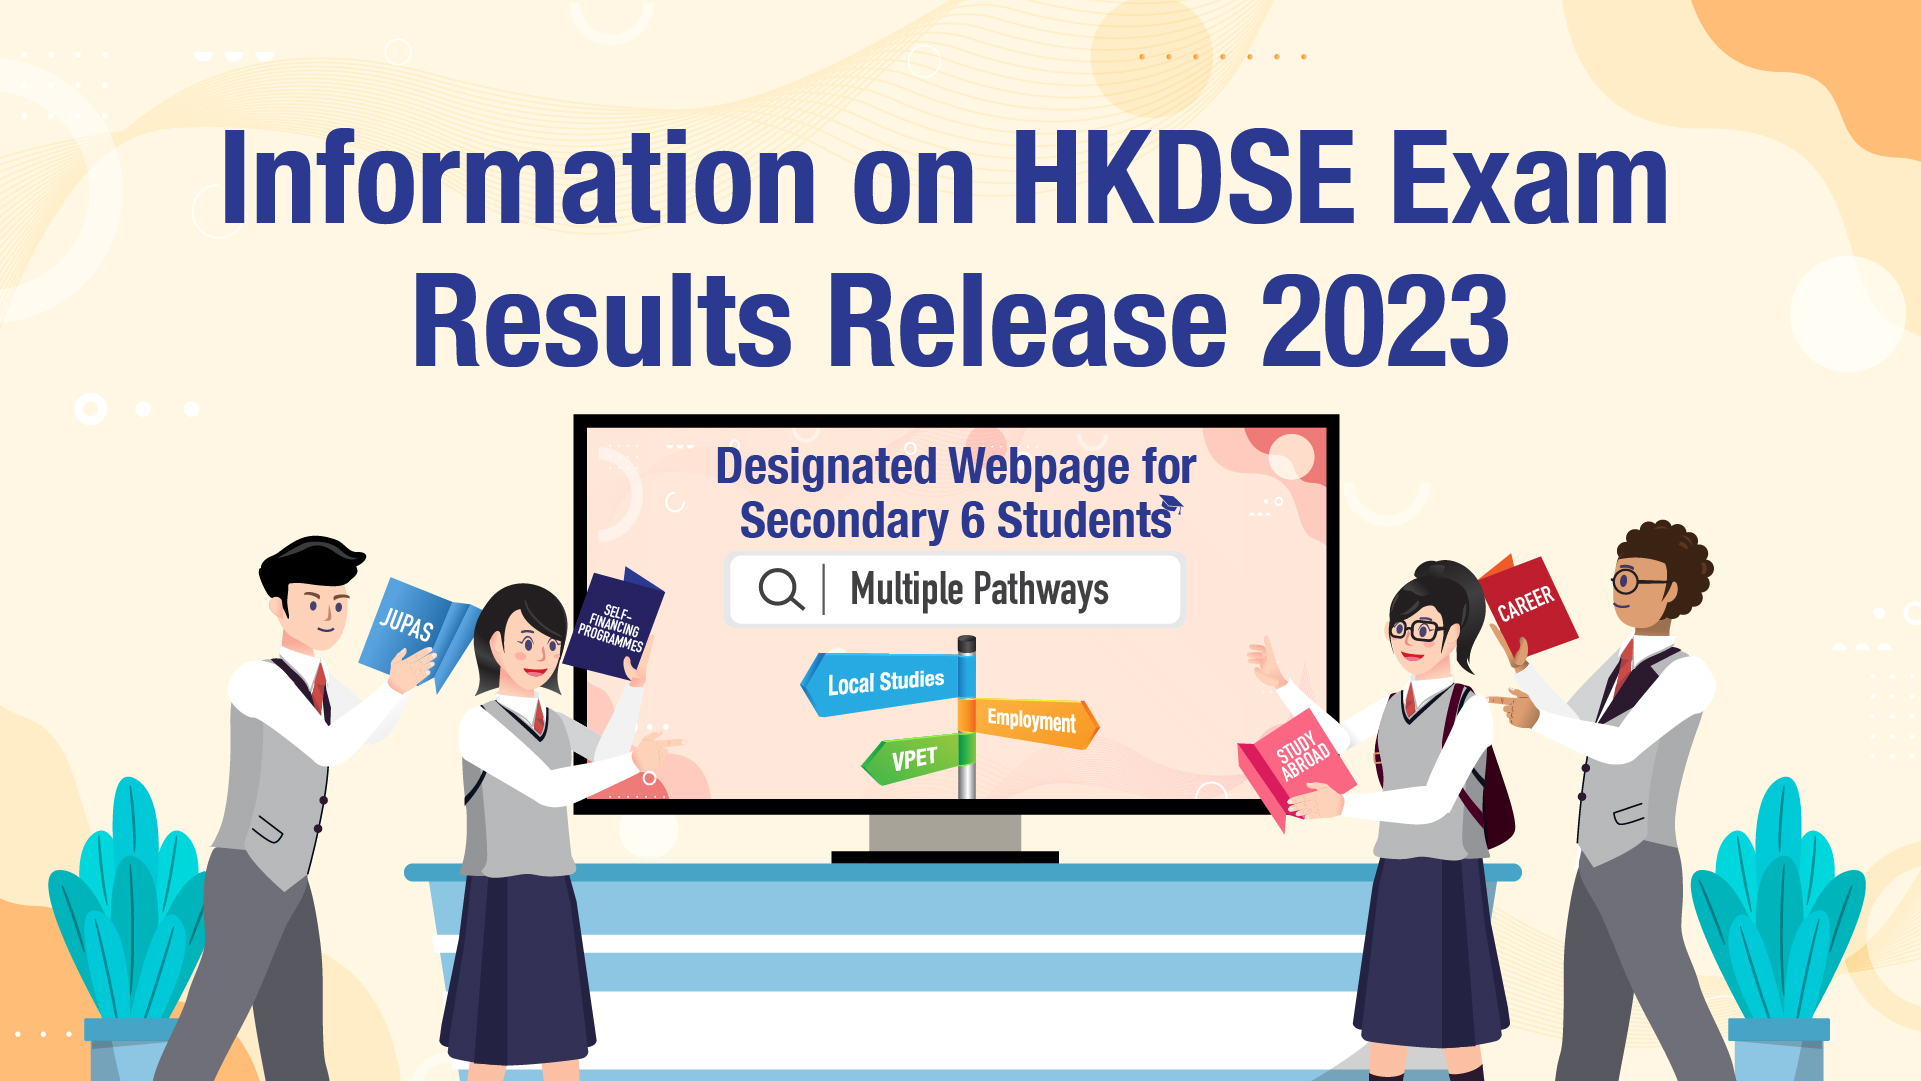 Information on HKDSE Exam Results Release 2023